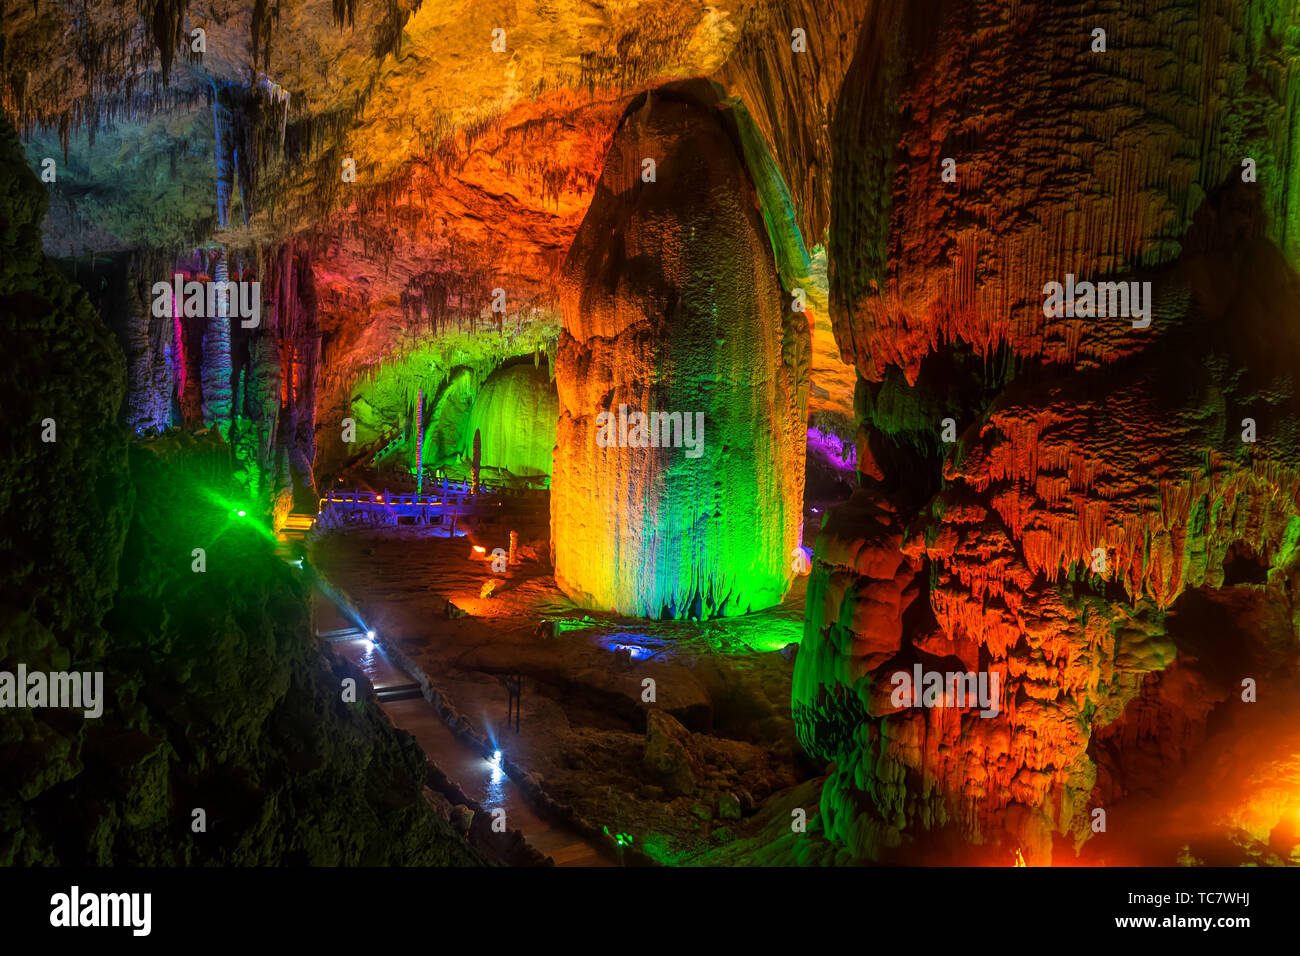 Yellow Dragon Cave, also known as The Wonder of the World's Caves, Zhangjiajie, Hunan, China Stock Photo